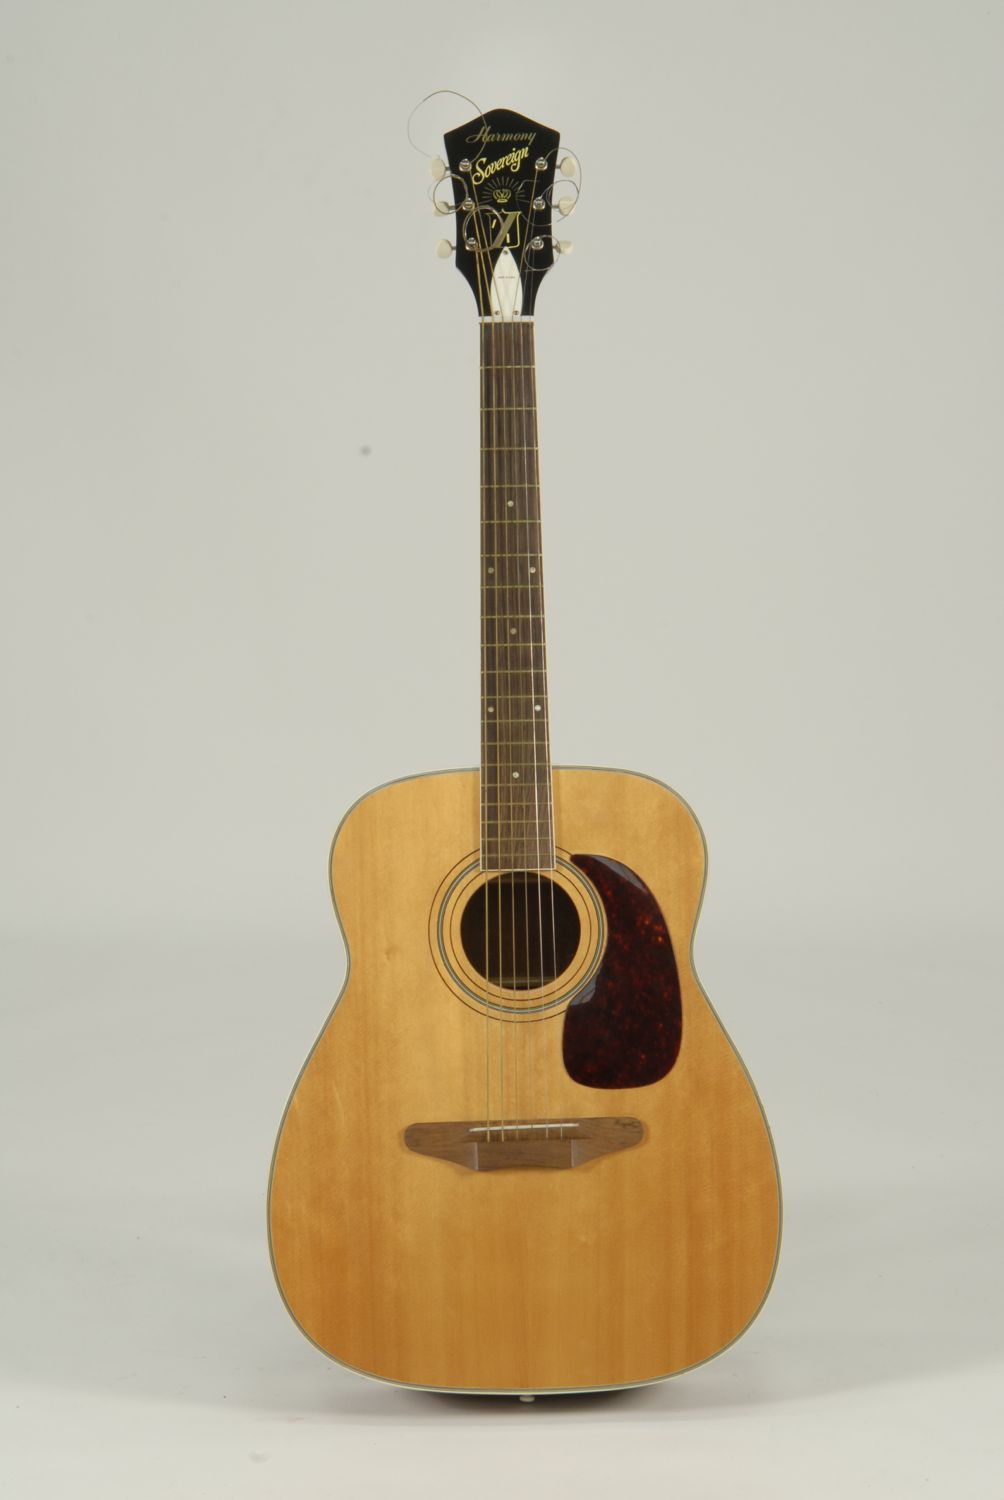 1965 HARMONY SOVEREIGN FLAT-TOP ACOUSTIC